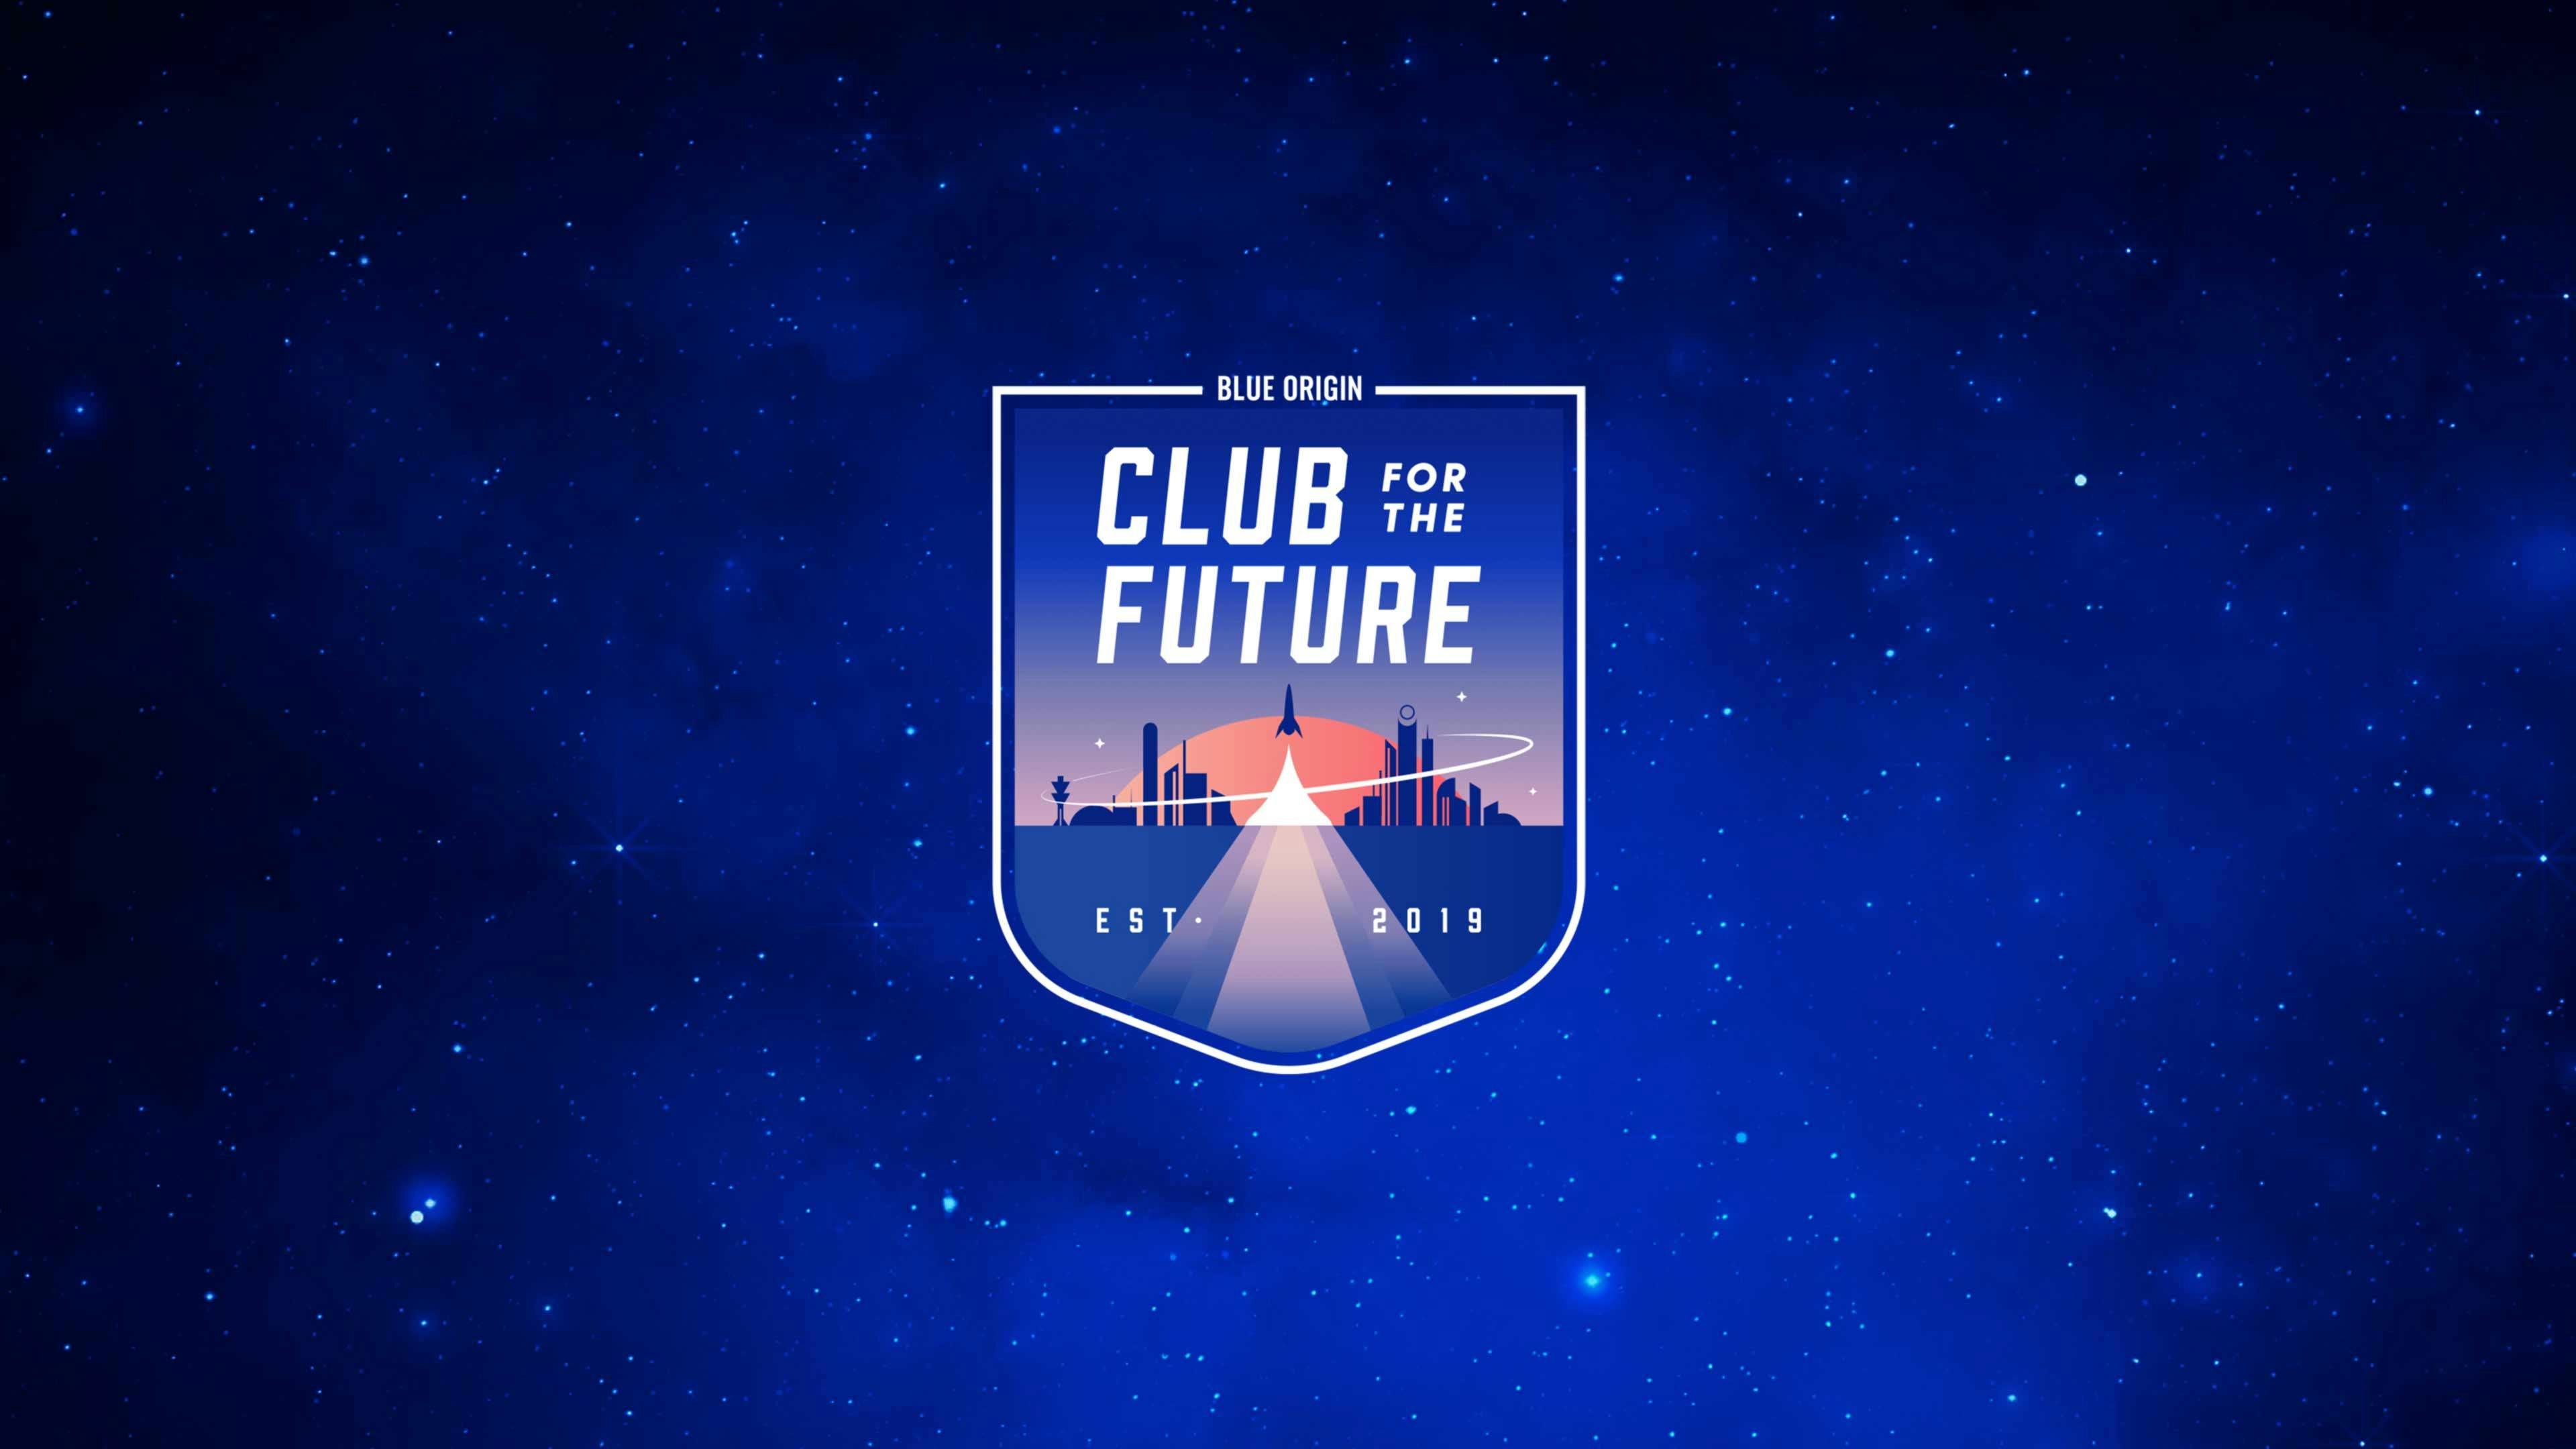 Club for the Future logo on a blue starry background